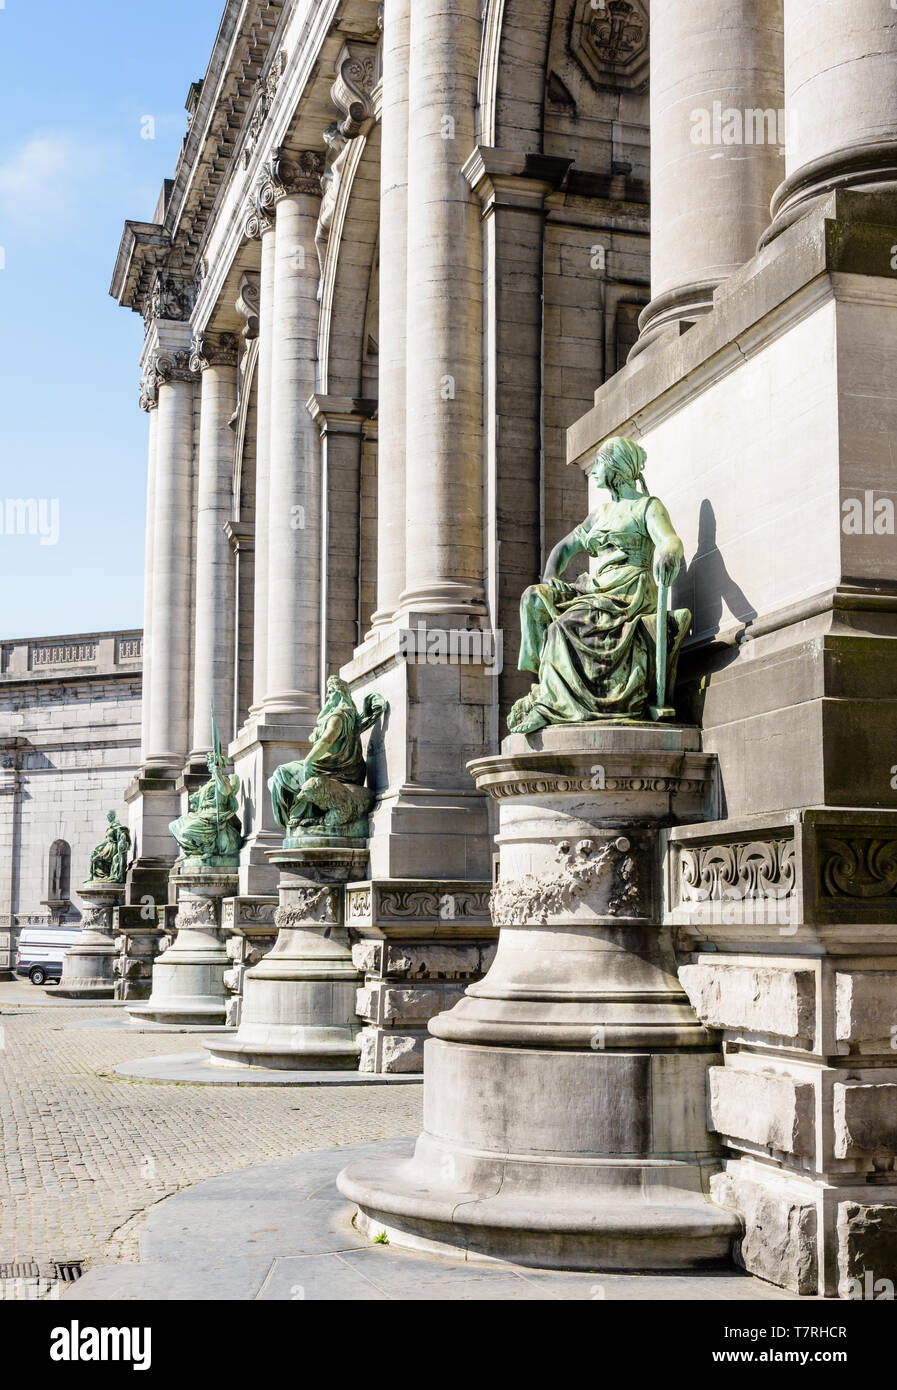 Close-up view of the statues at the base of the columns on the eastern side of the arcade du Cinquantenaire, the triumphal arch in Brussels, Belgium. Stock Photo